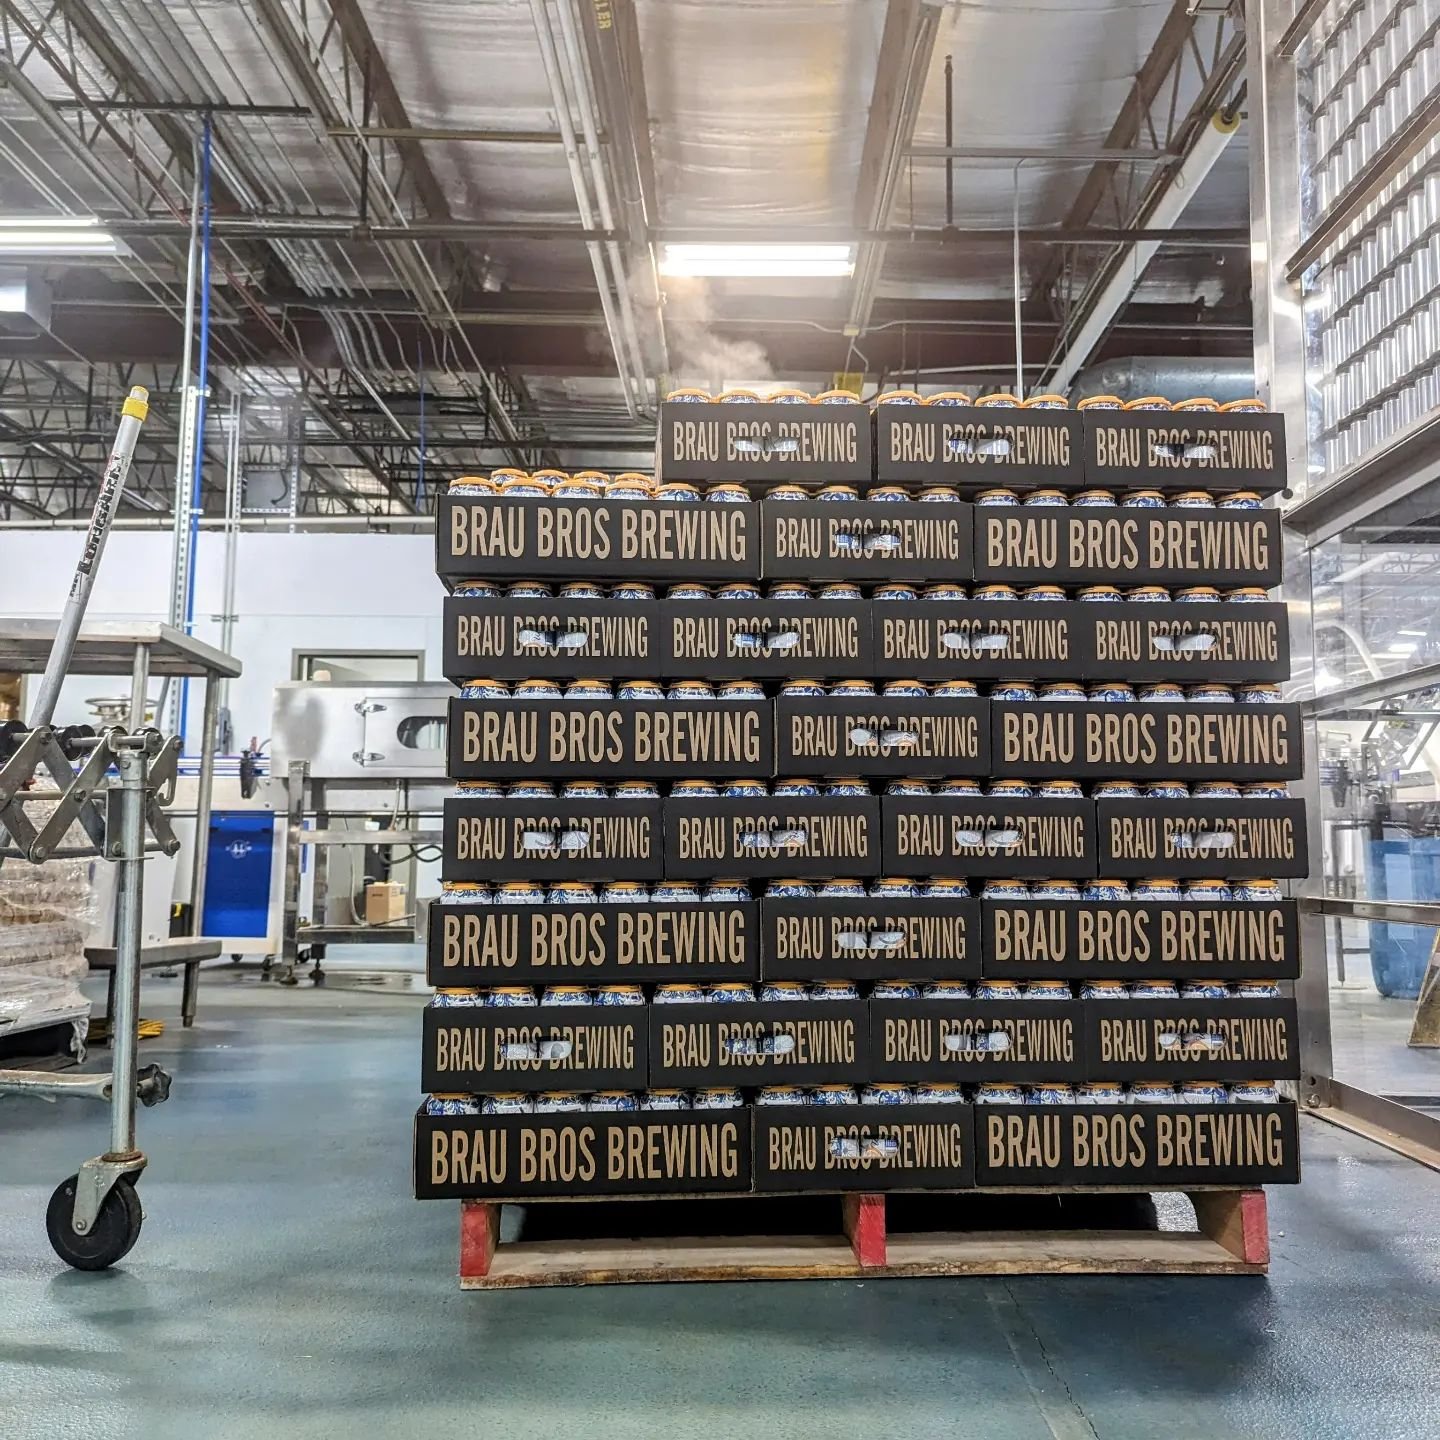 Wednesdays are for a pallet if White Cap. ☀️